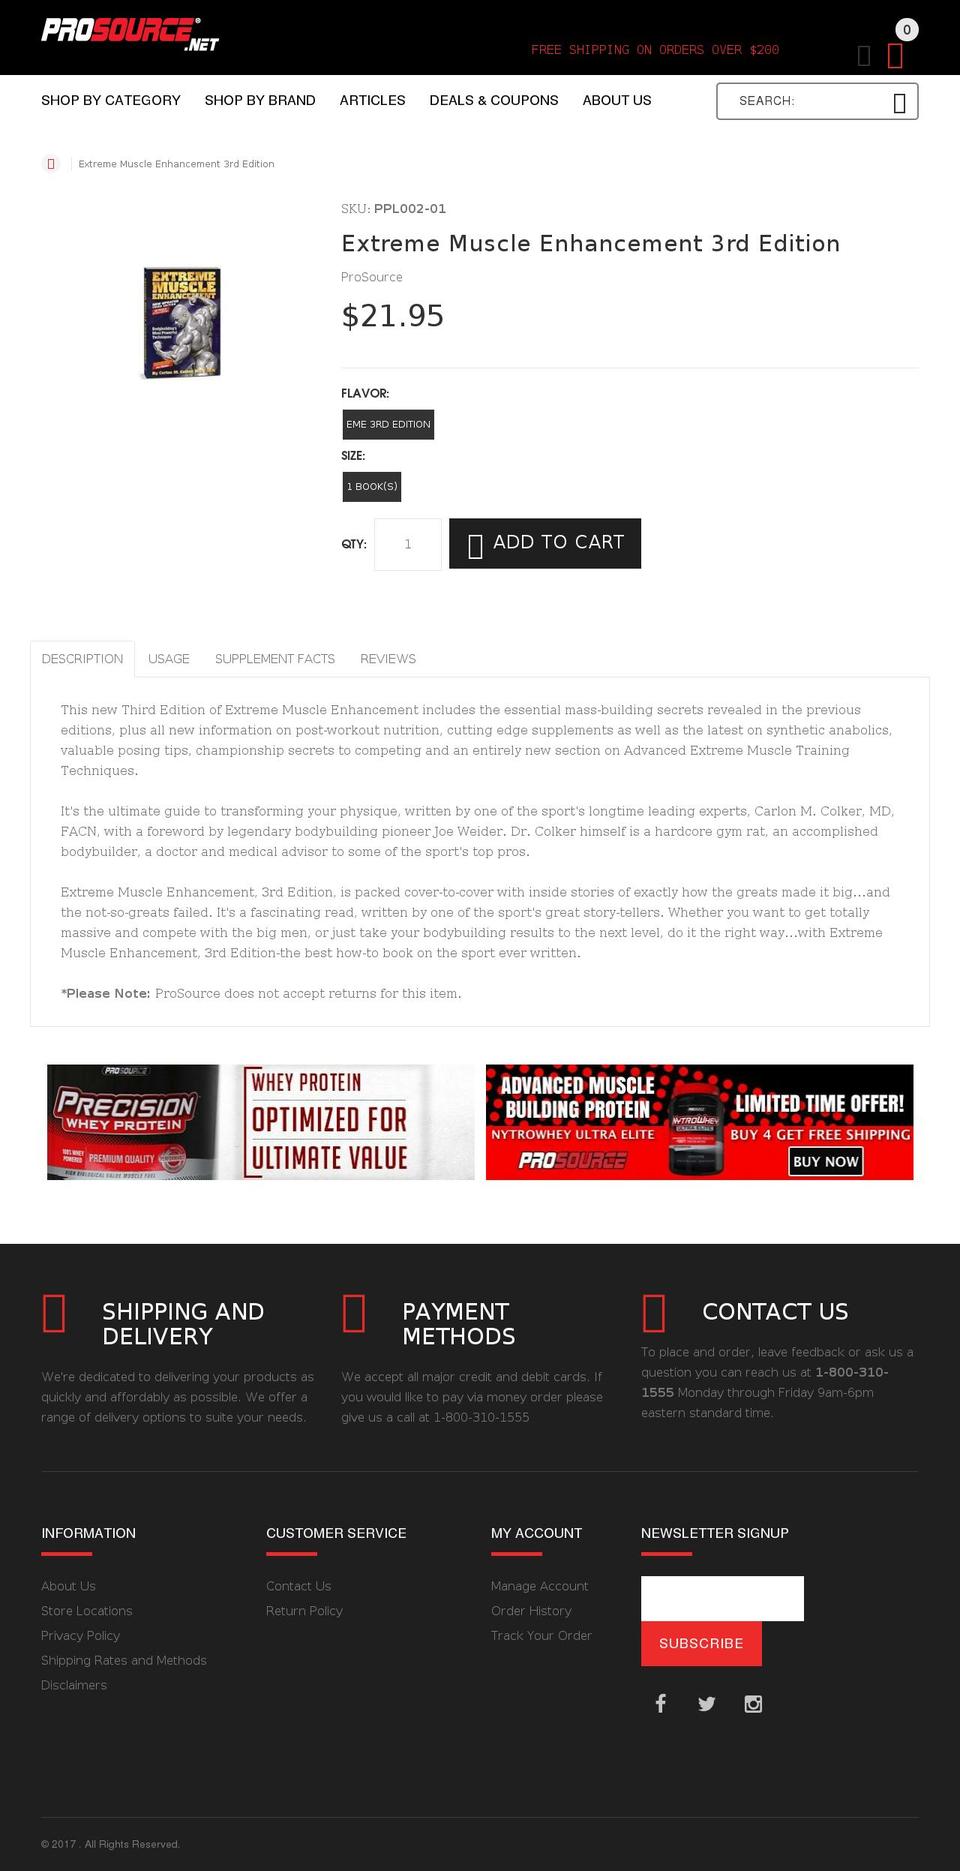 install-me-yourstore-v2-1-7 Shopify theme site example extrememuscleenhancement.com